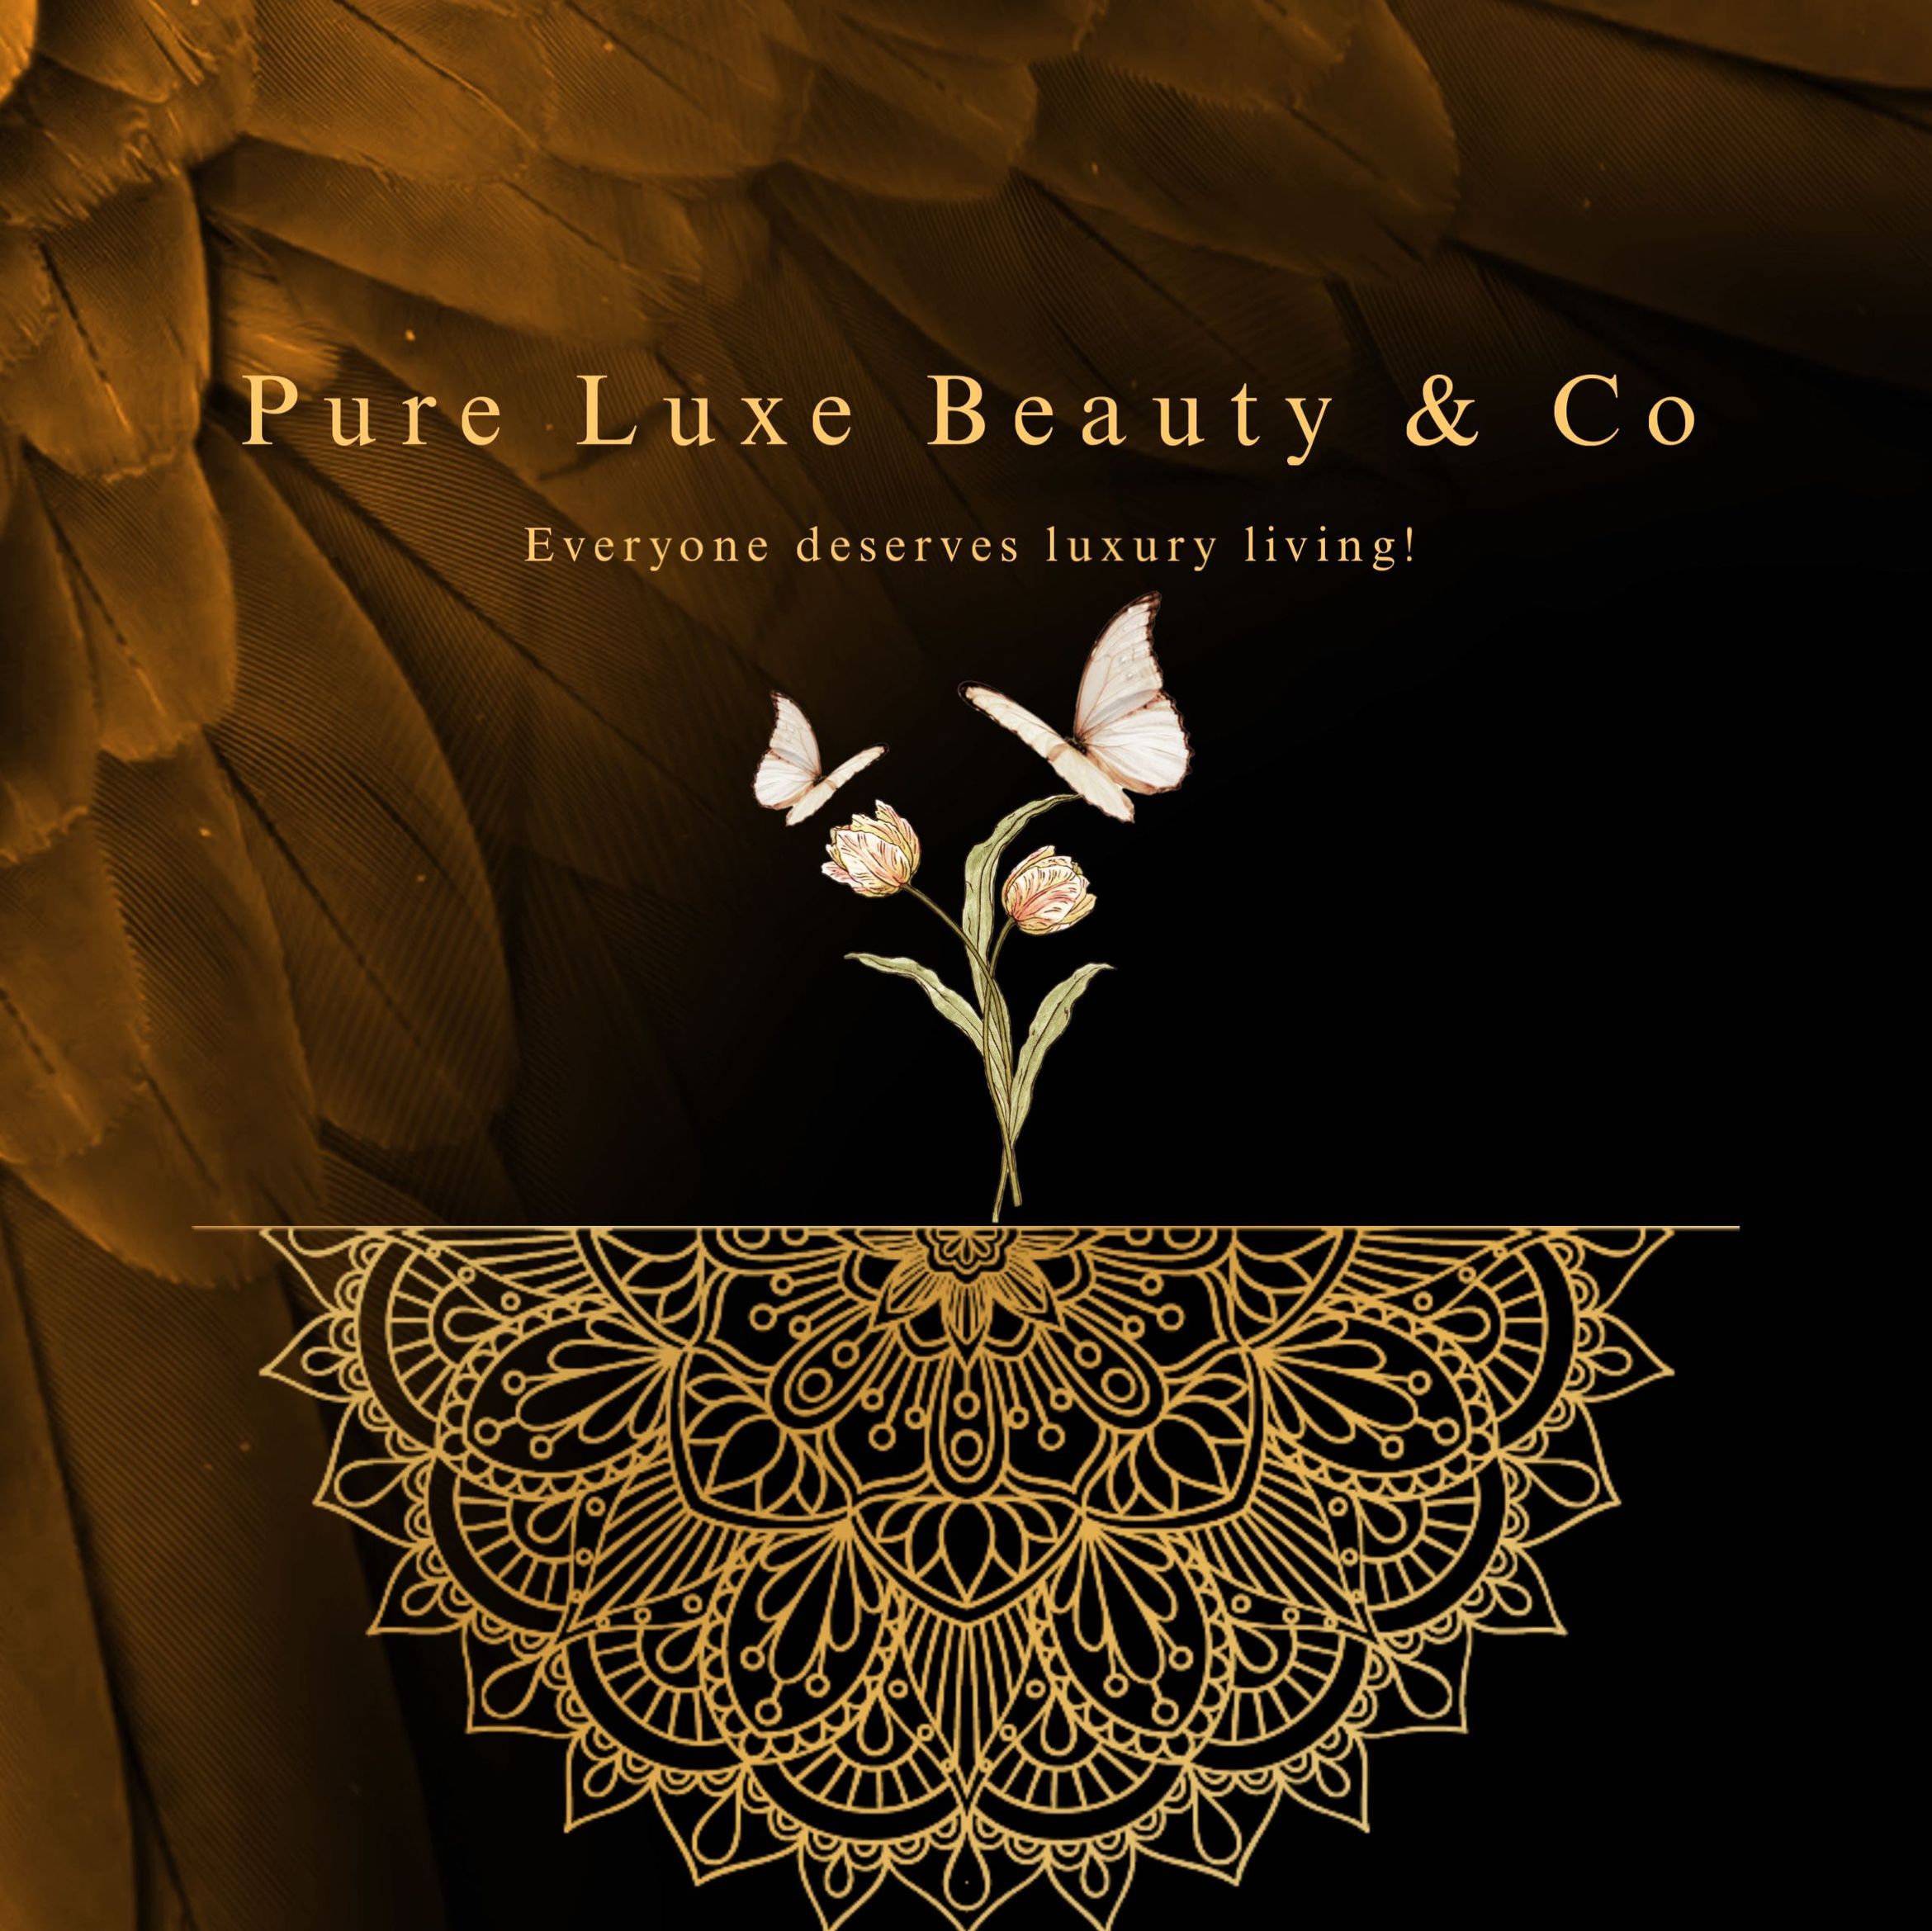 Pure Luxe Beauty & Co, 2500 Dr Martin Luther King Jr St S, St Petersburg, 33705